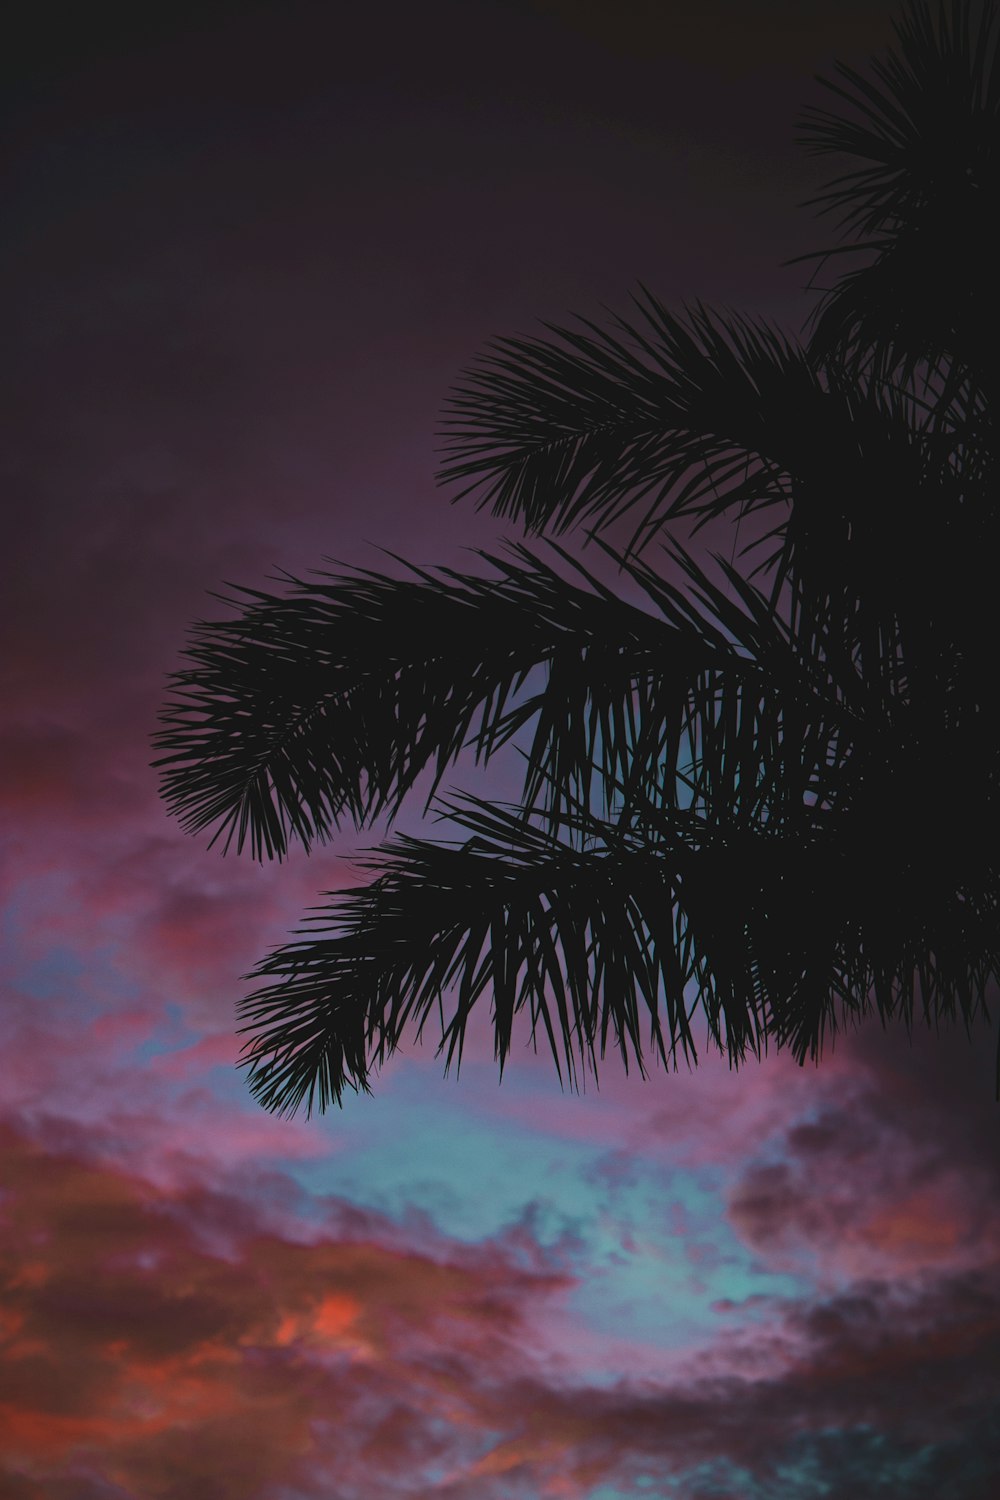 silhouette of coconut palm tree